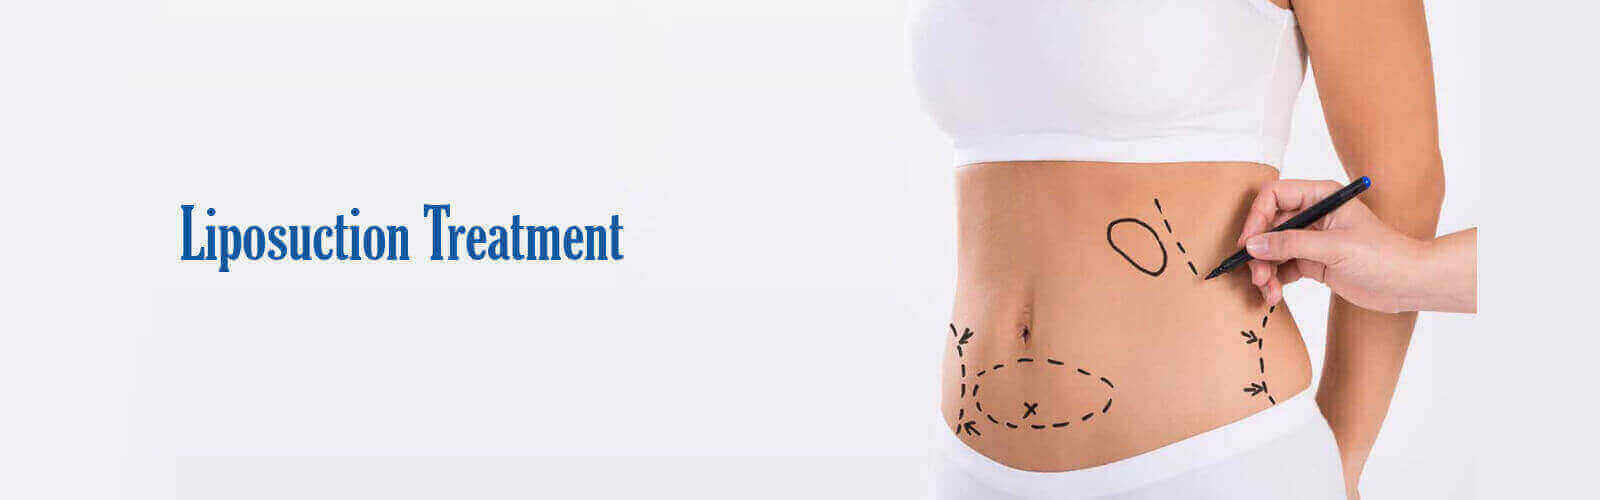 Liposuction Treatment in Paraguay